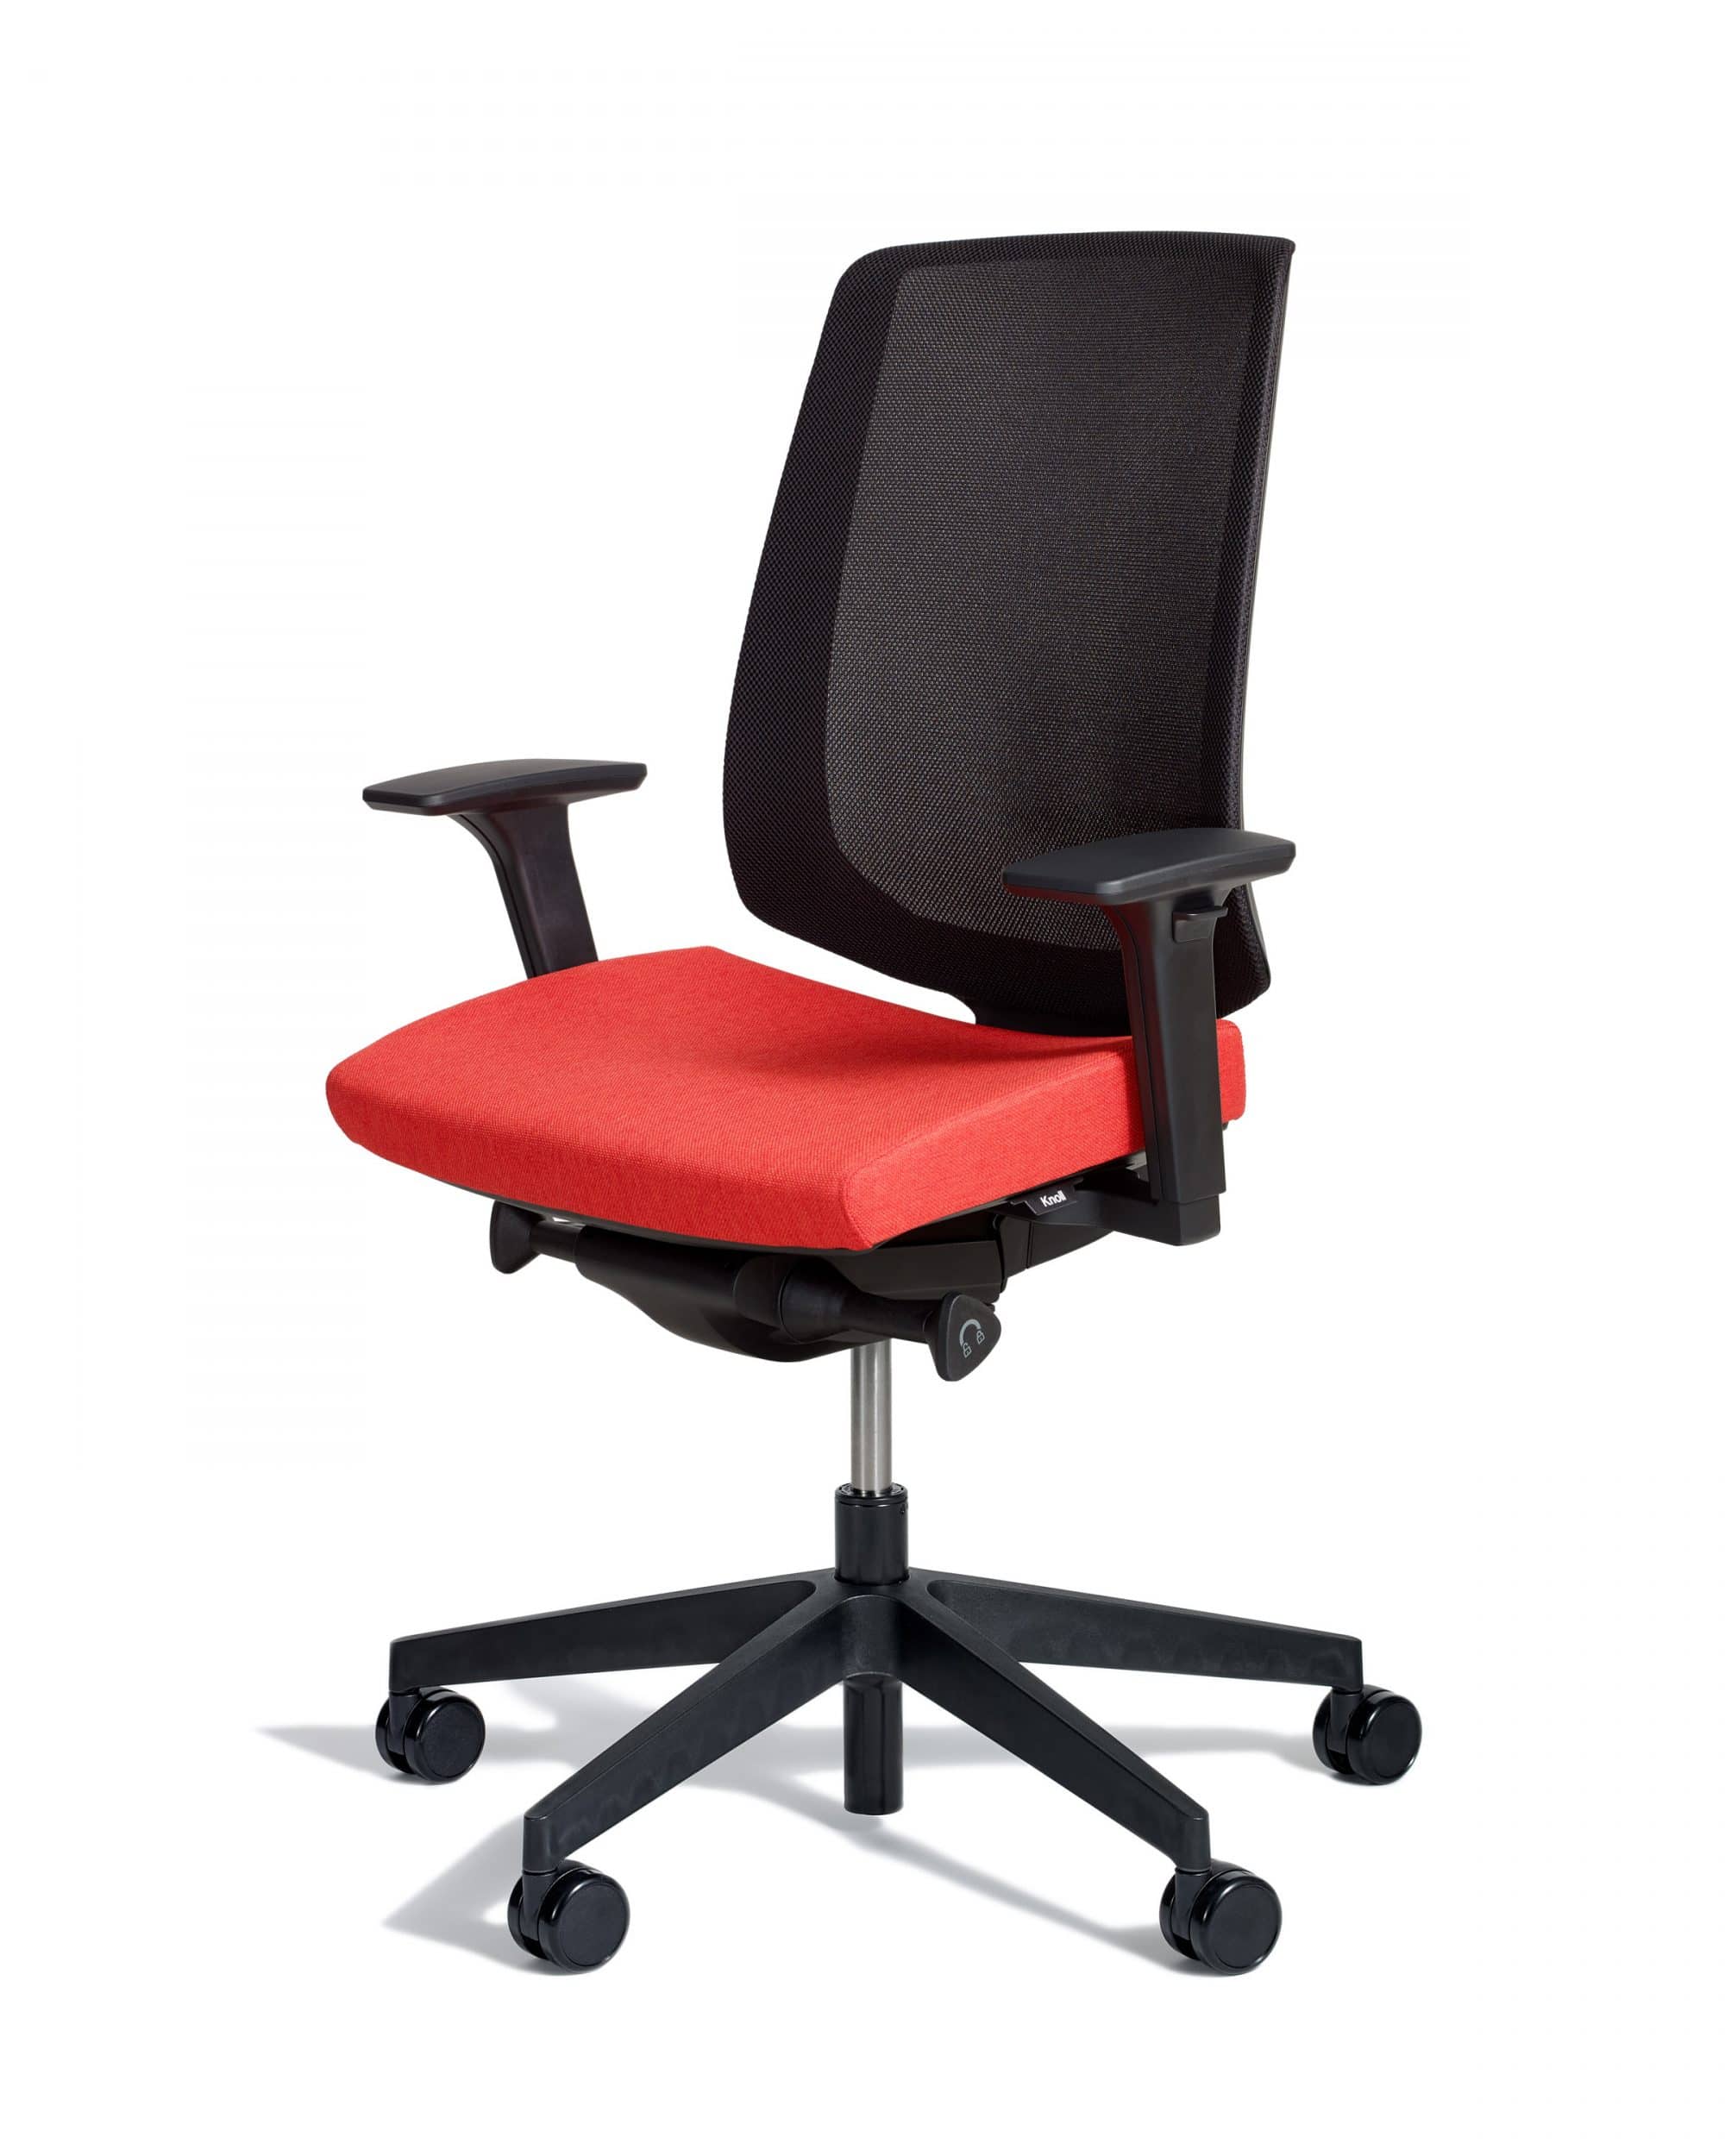 Office chair vs task chair: is there really a difference?